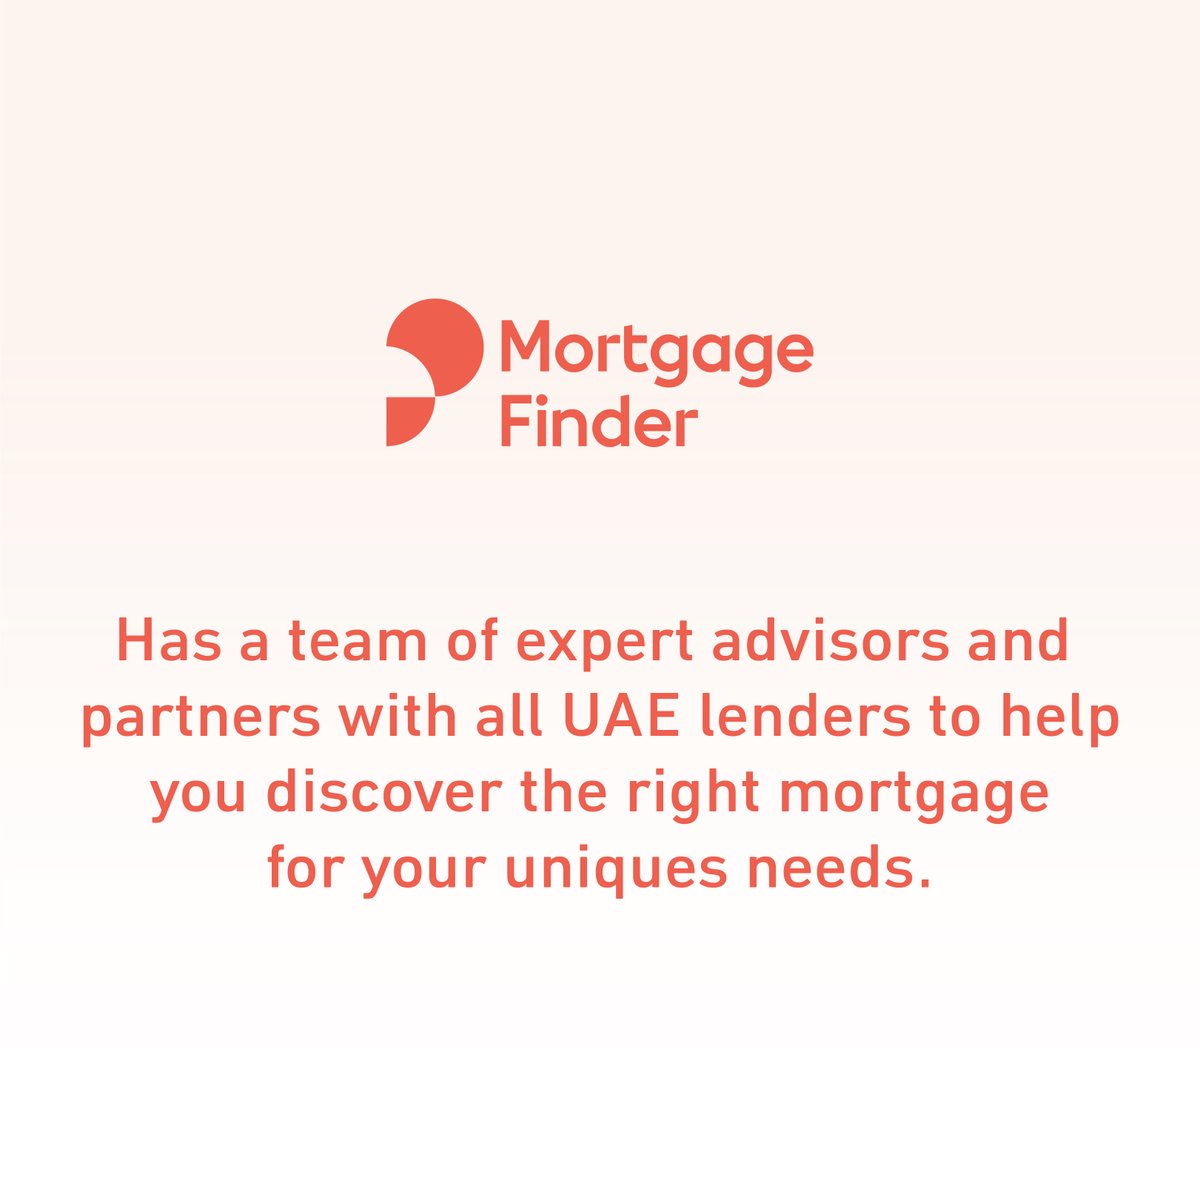 Looking for a mortgage that fits your unique needs? 📷 📷 Book your slot now and talk to the experts at Mortgage Finder through the below link. bit.ly/3LsWH2p #MortgageFinder #PropertyFinder #Mortgage #HomeLoans